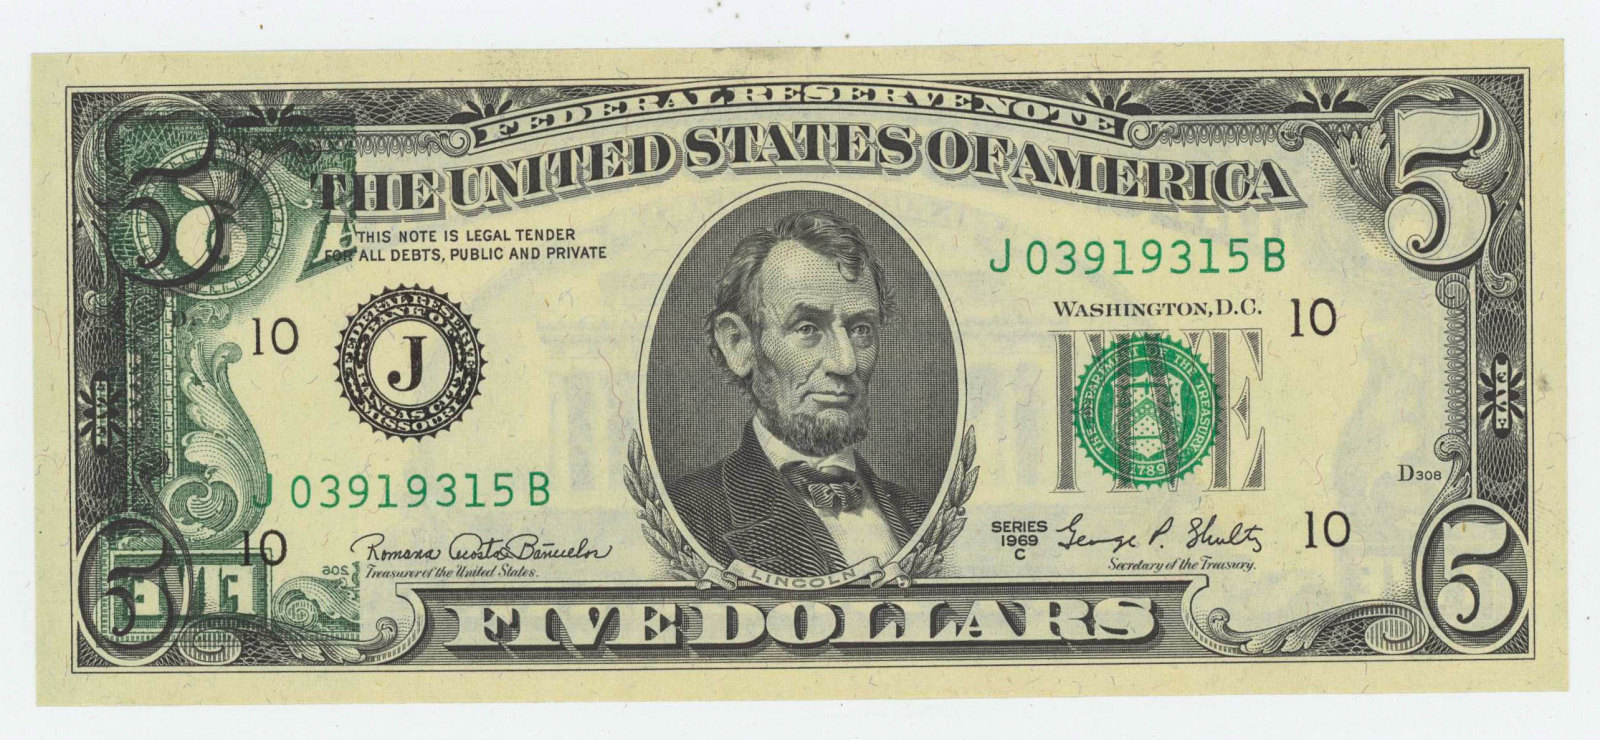 1969 FIVE DOLLAR NOTE WITH INK TRANSFER ERROR